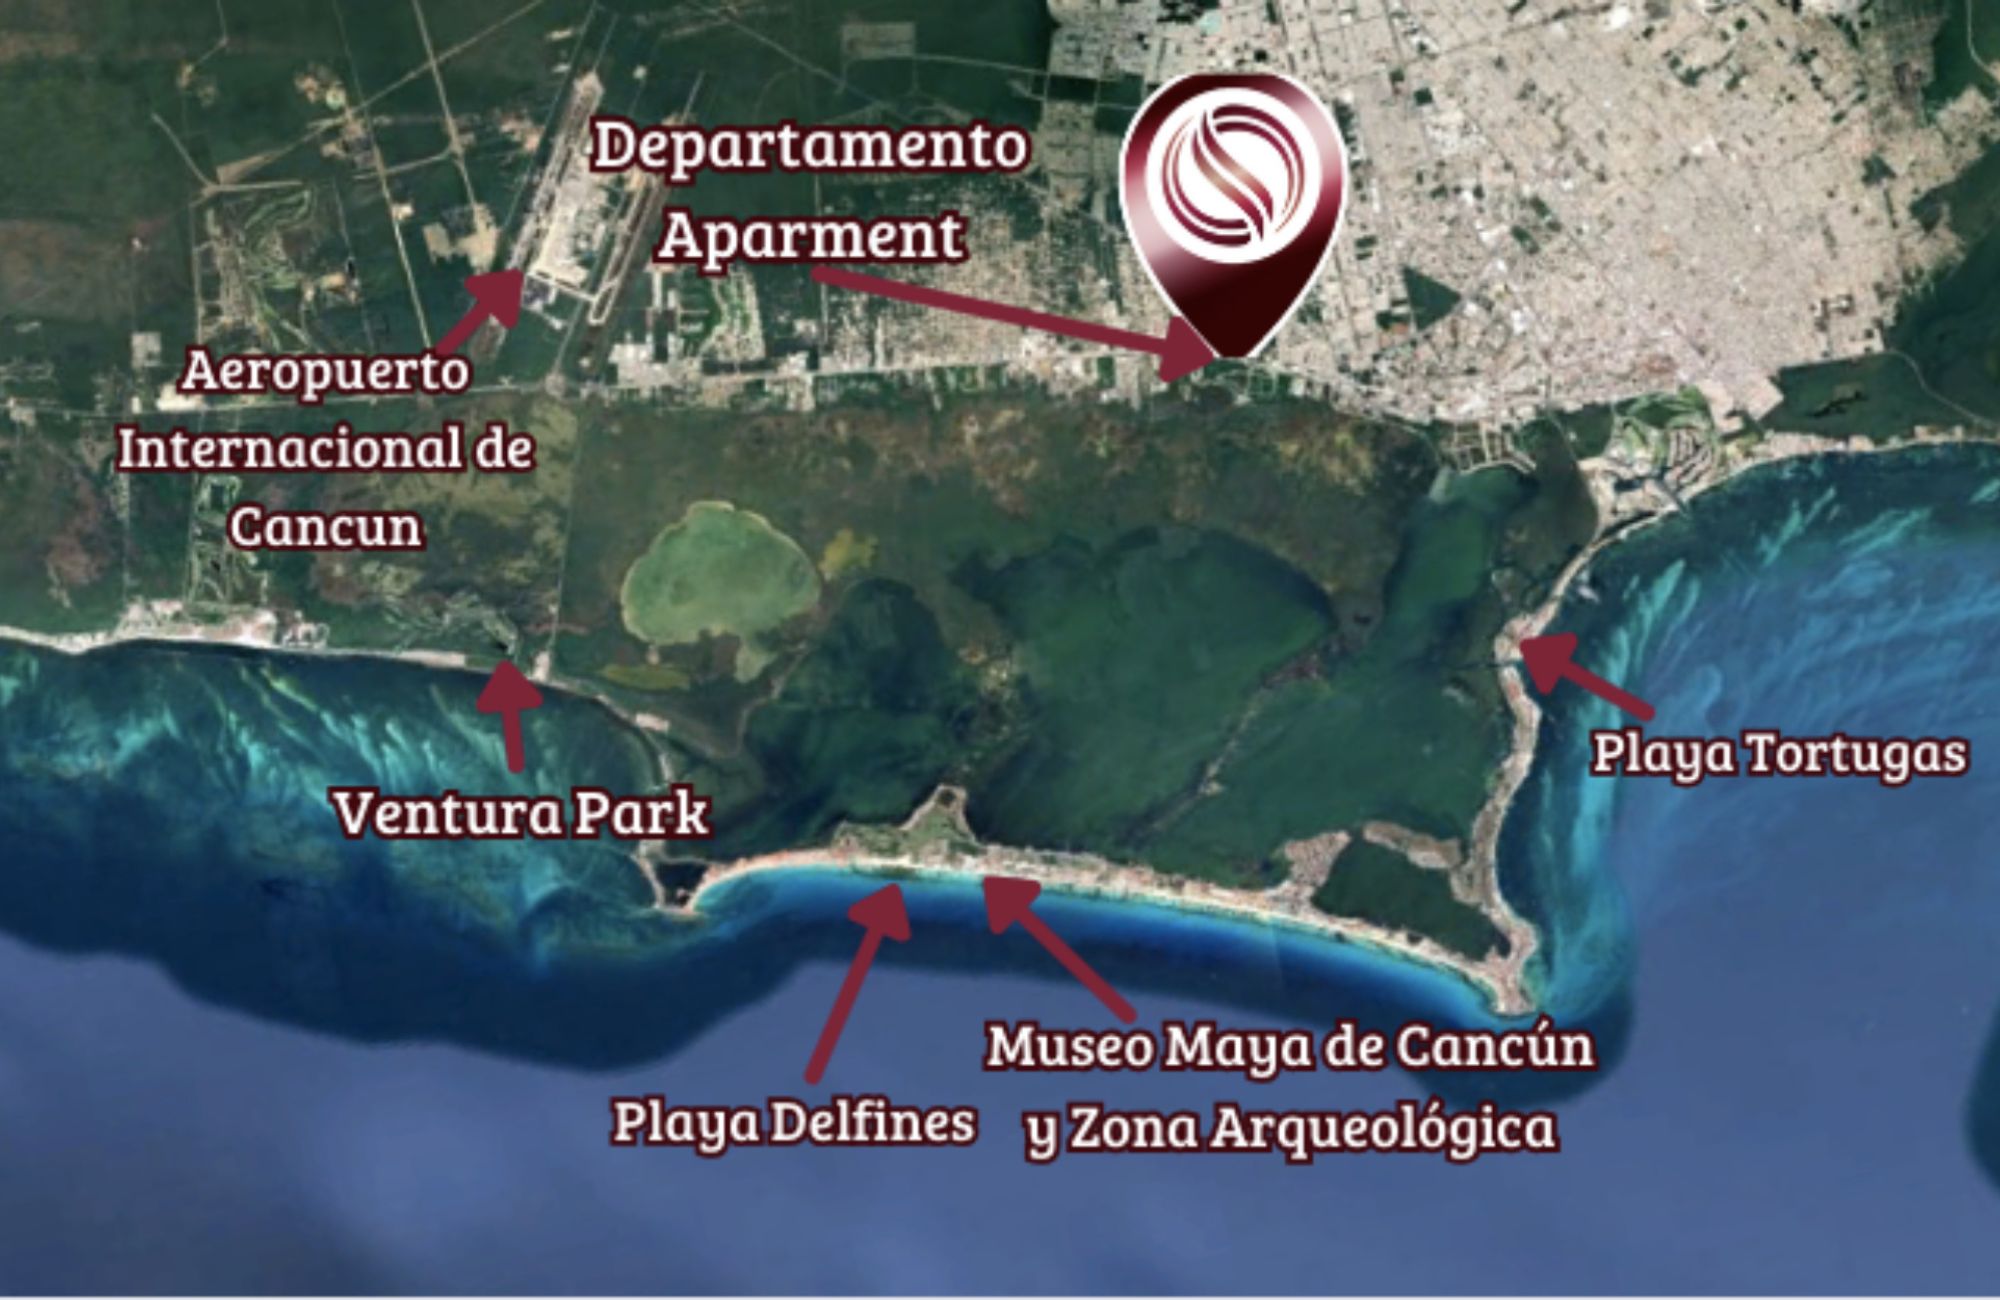 Apartment with smart home system, 50 meters from the sea, in Costa Mujeres, for sale.